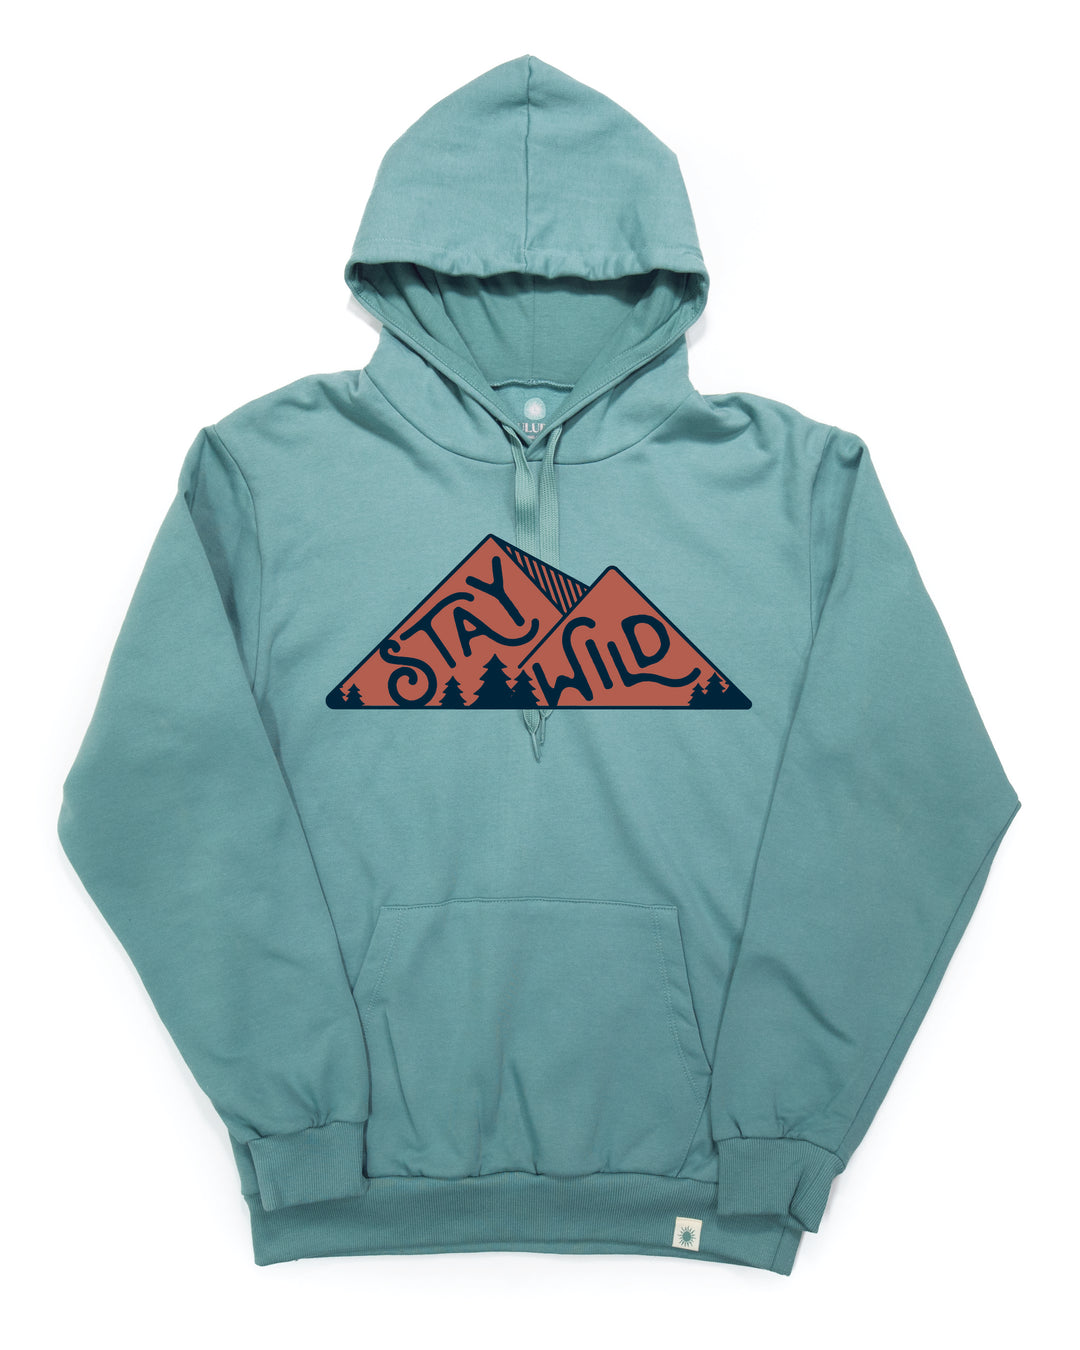 Stay Wild Teal Classic Hoodie